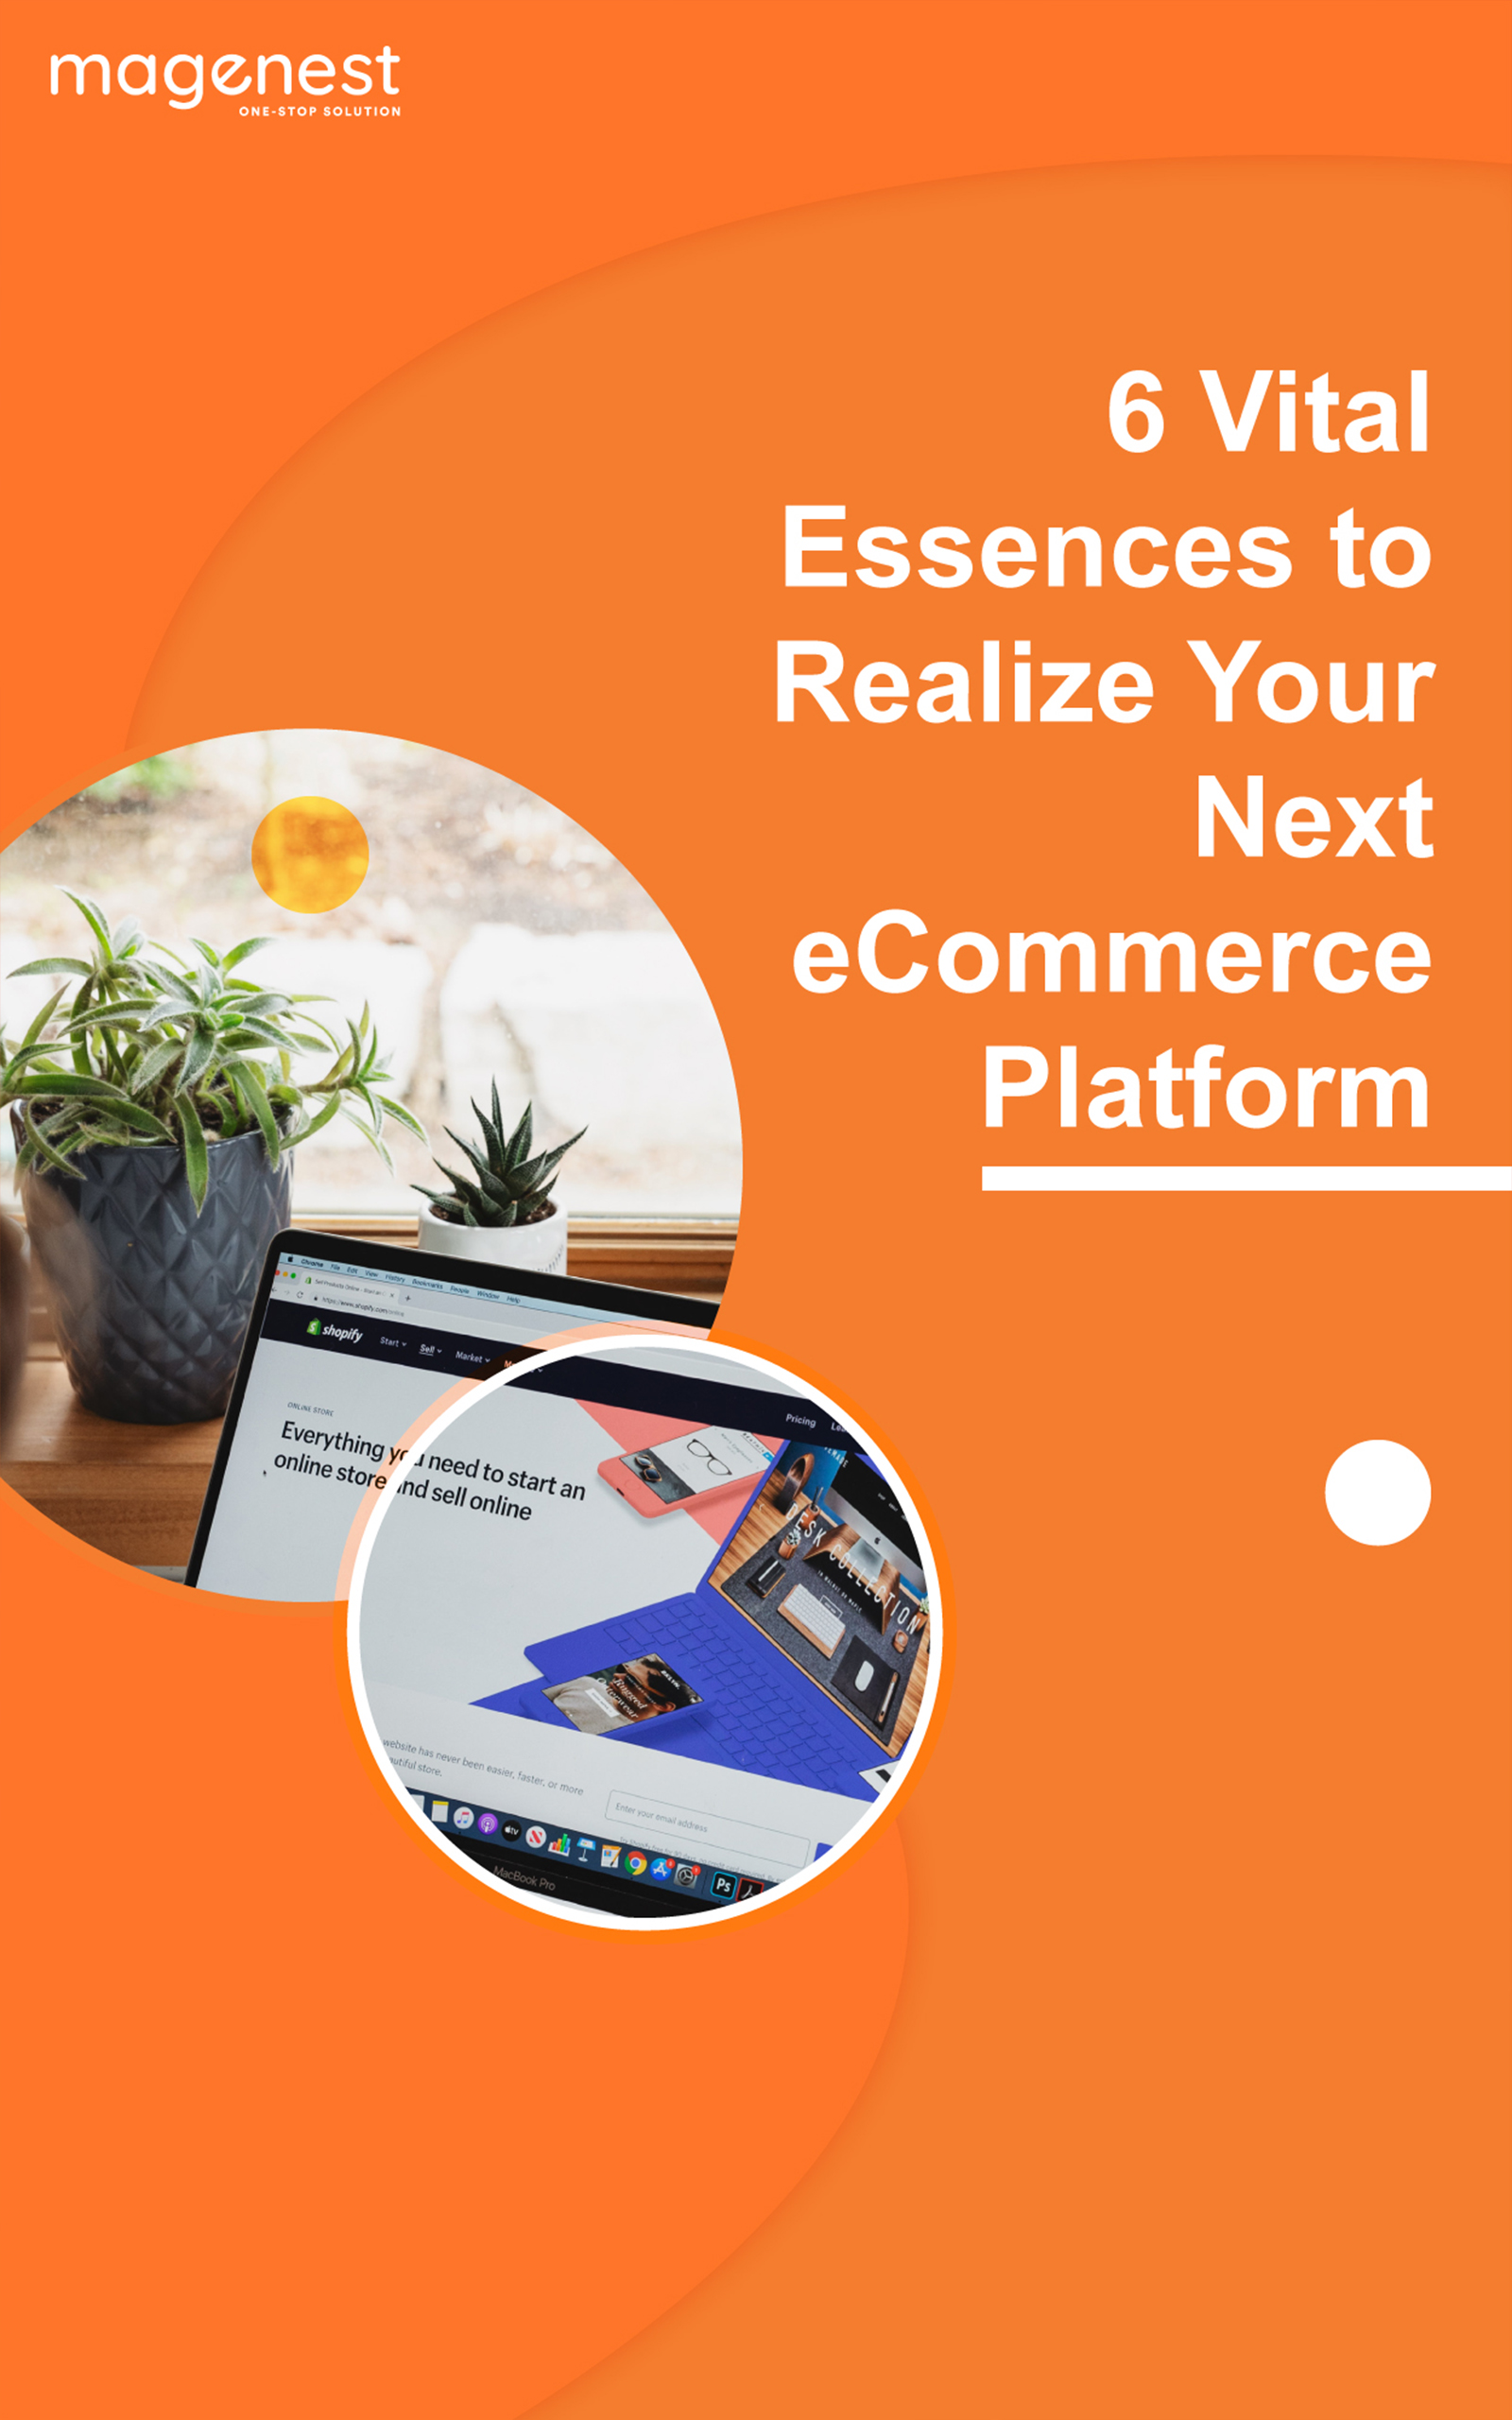 eBook: How to Realize Your Next eCommerce Platform with 6 Crucial Questions0